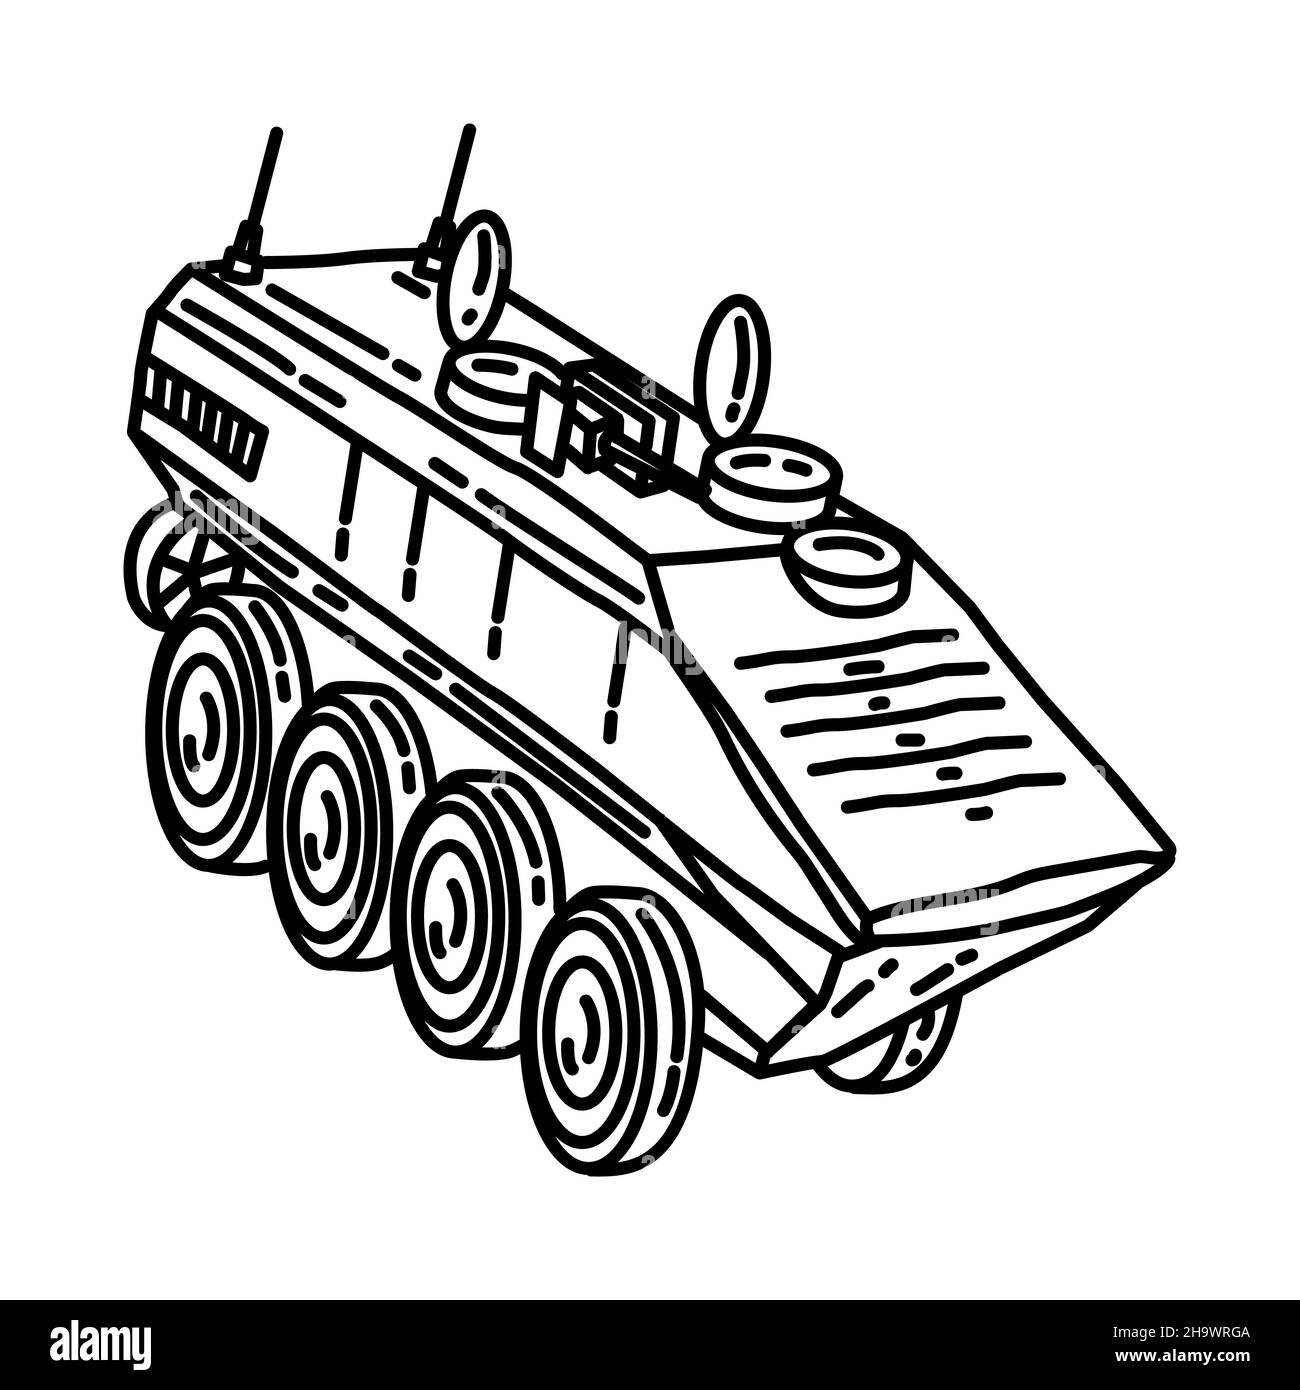 Marine Amphibious Combat Vehicle Part of Military and Marine Corps Equipments Hand Drawn Icon Set Vector Stock Vector